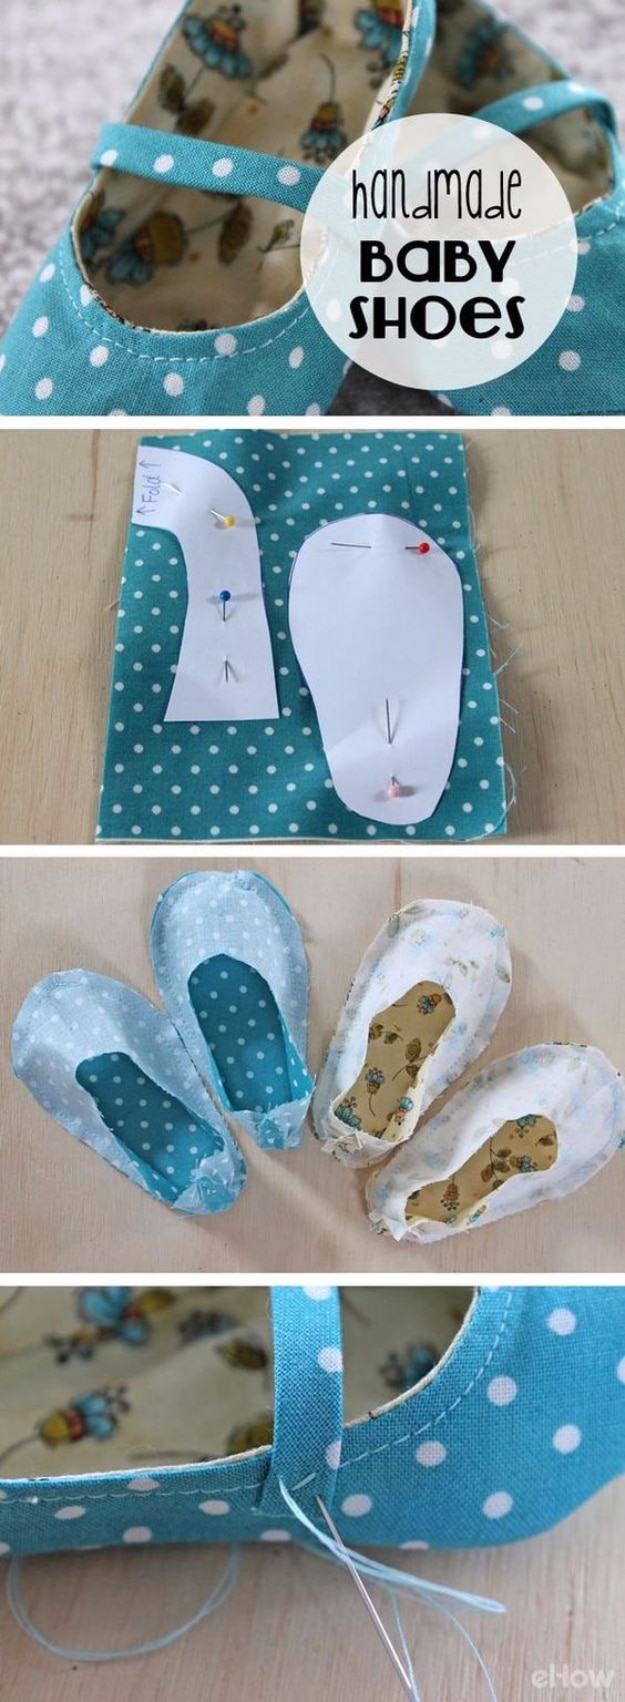 51 Things to Sew for Baby - Handmade Fabric Baby Shoes - Cool Gifts For Baby, Easy Things To Sew And Sell, Quick Things To Sew For Baby, Easy Baby Sewing Projects For Beginners, Baby Items To Sew And Sell #baby #diy #diygifts